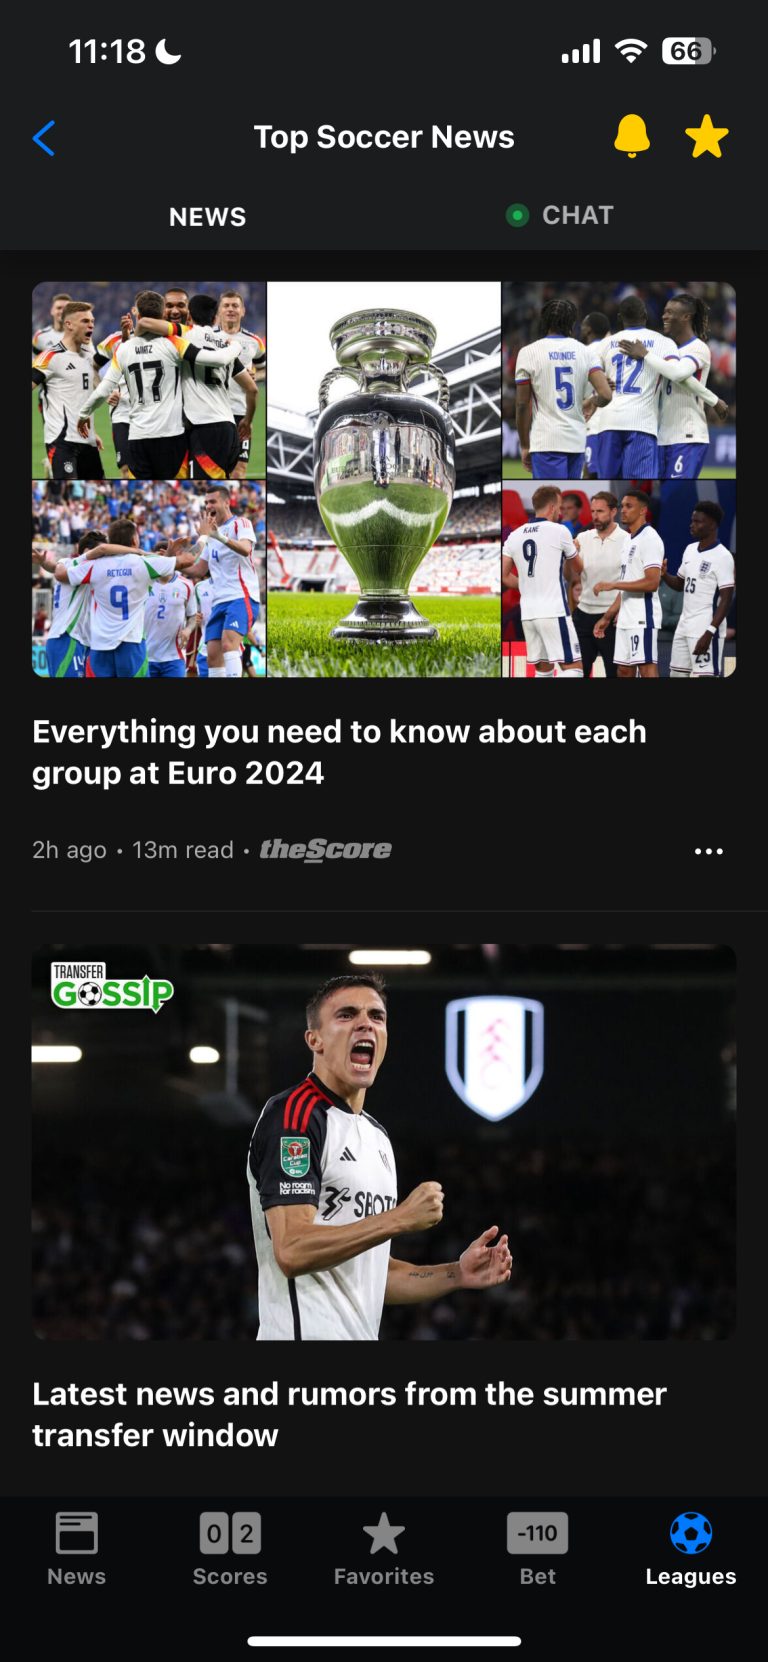 An introduction to Top Soccer News on theScore ⚽️